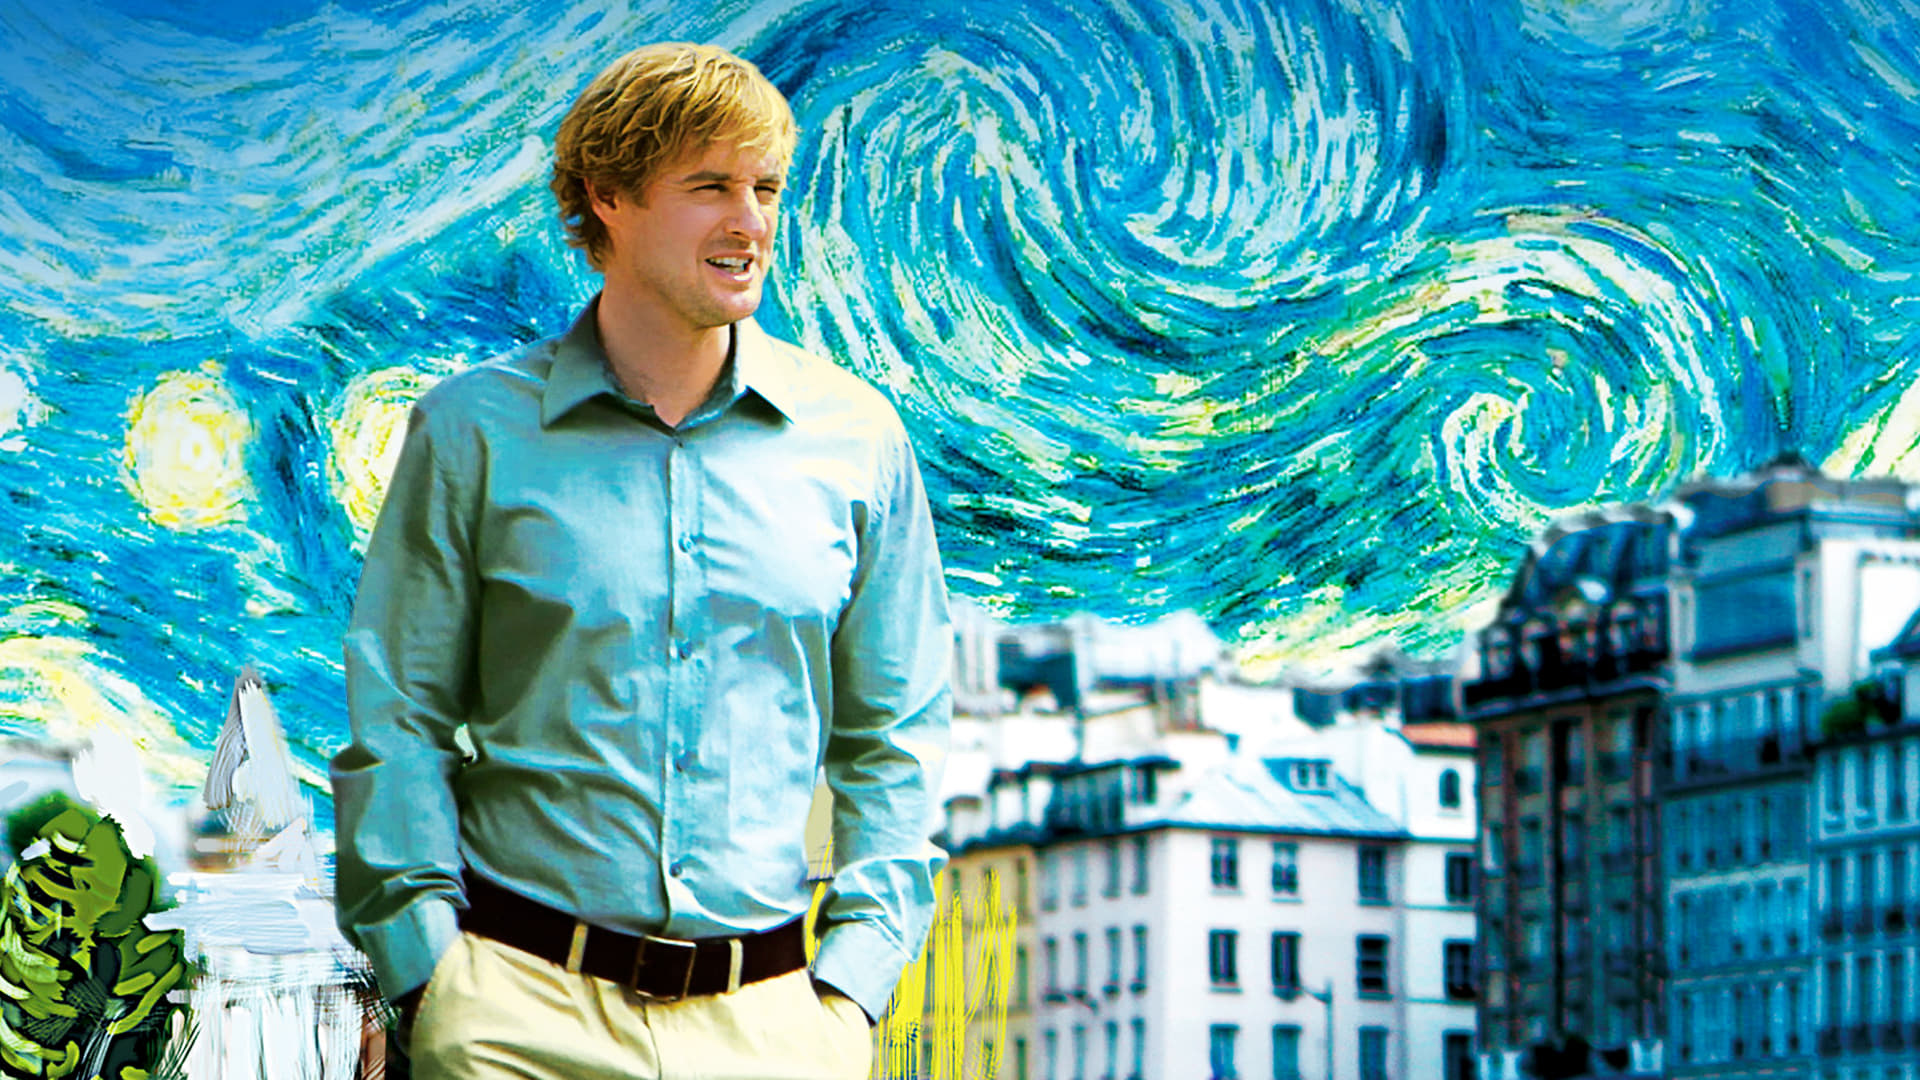 Midnight in Paris: Opening film at the 2011 Cannes Film Festival, Owen Wilson. 1920x1080 Full HD Background.